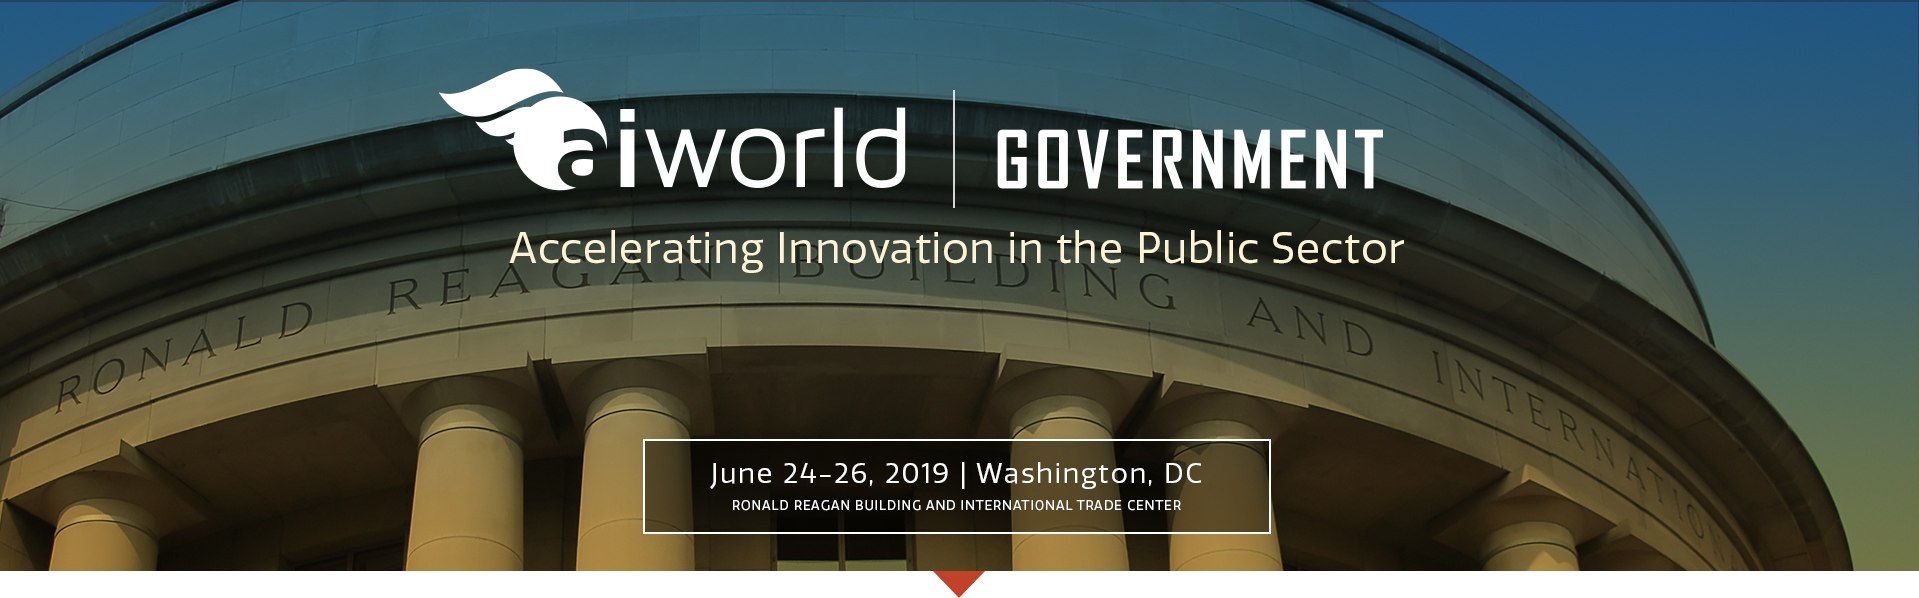 Boston Global Forum – Michael Dukakis Institute will be a Strategic Alliance Host of AI World Government Conference & Expo 2019